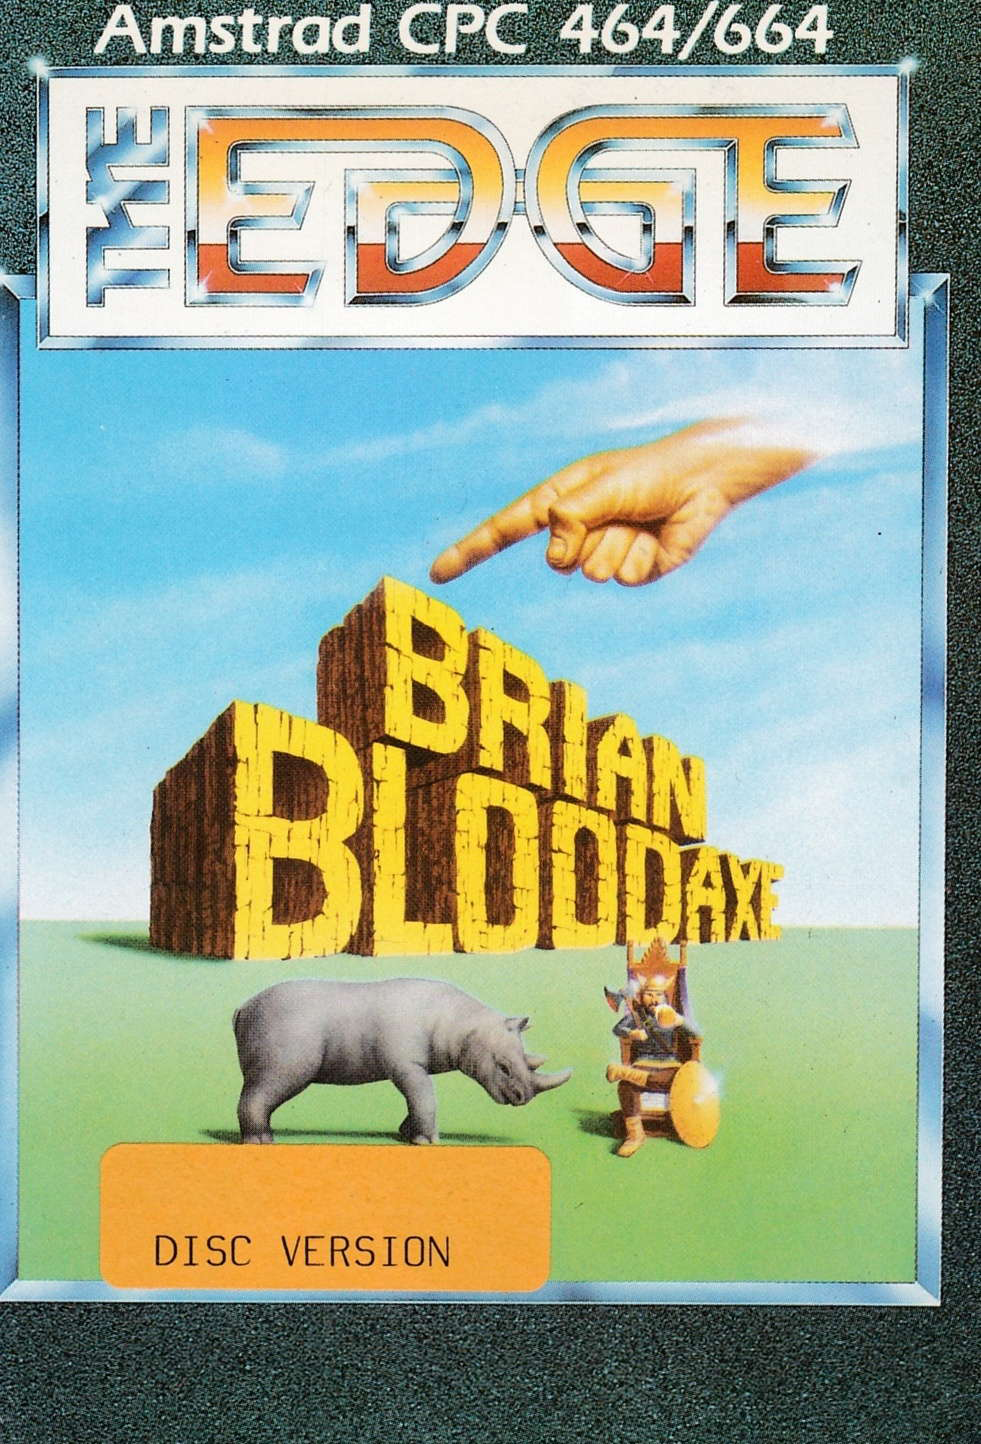 cover of the Amstrad CPC game Brian Bloodaxe  by GameBase CPC